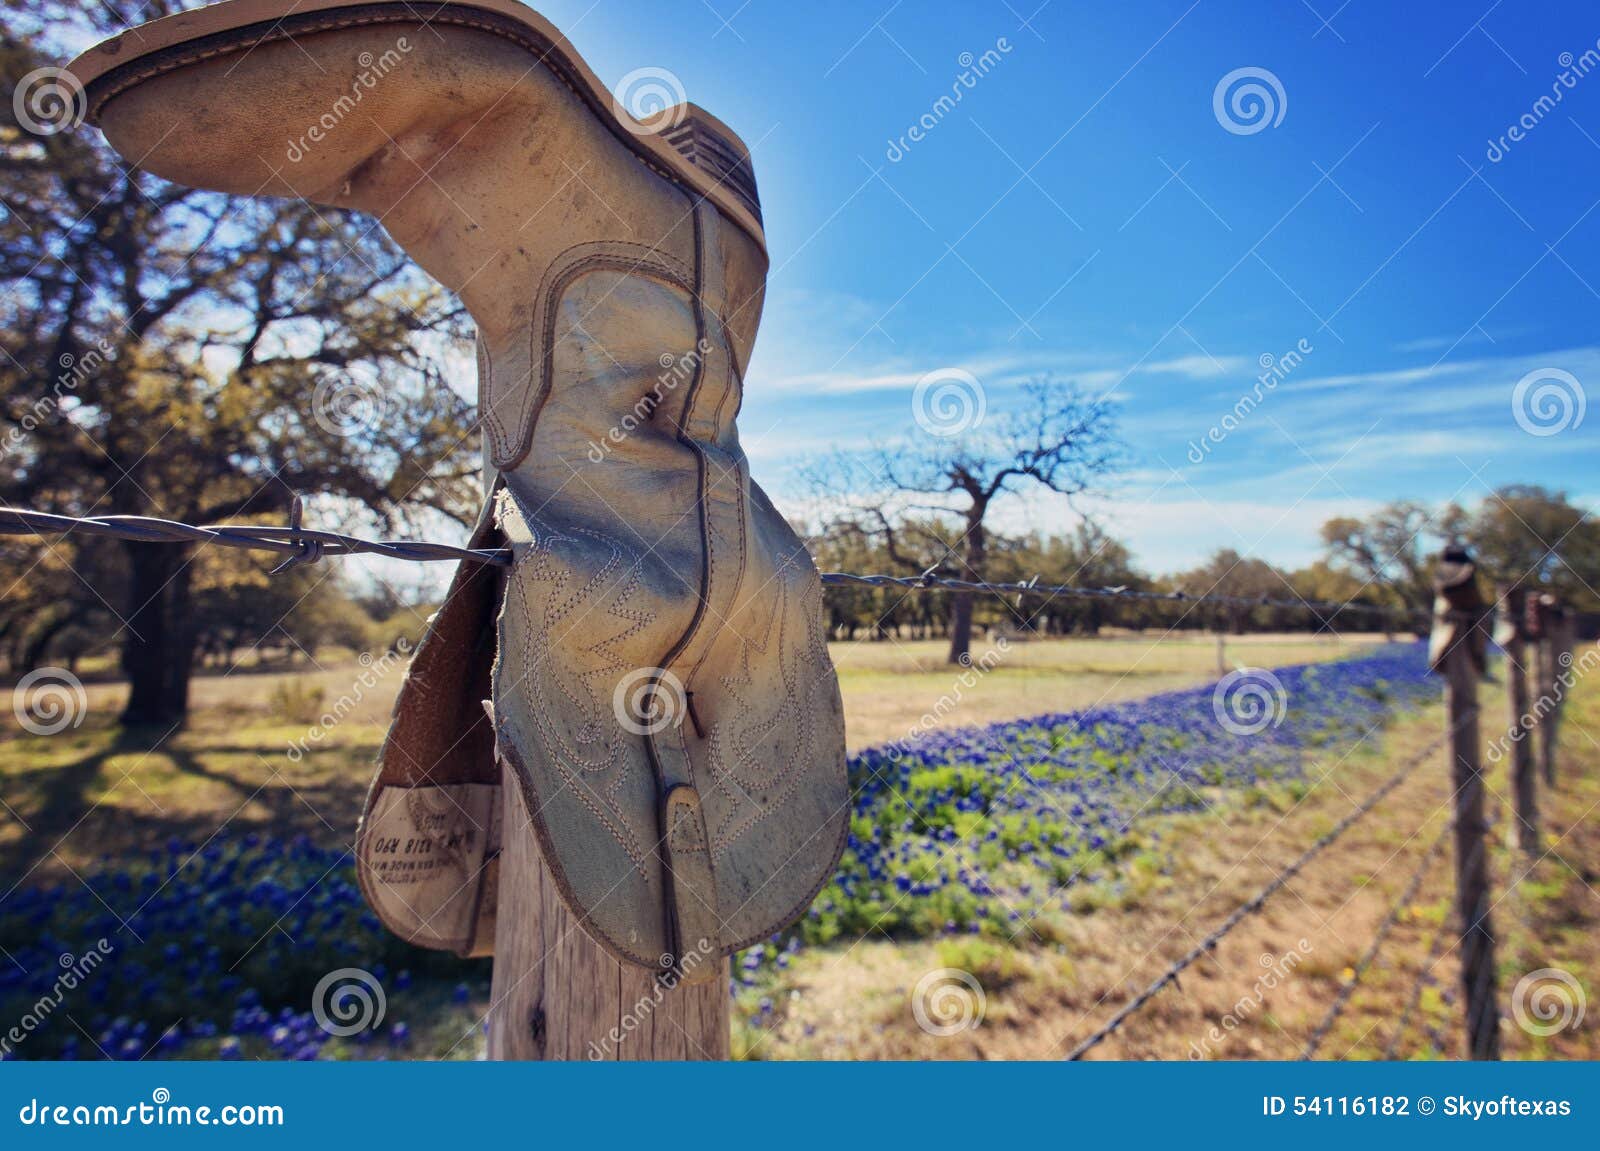 cowboy boots on barbed wire fence with bluebonnets